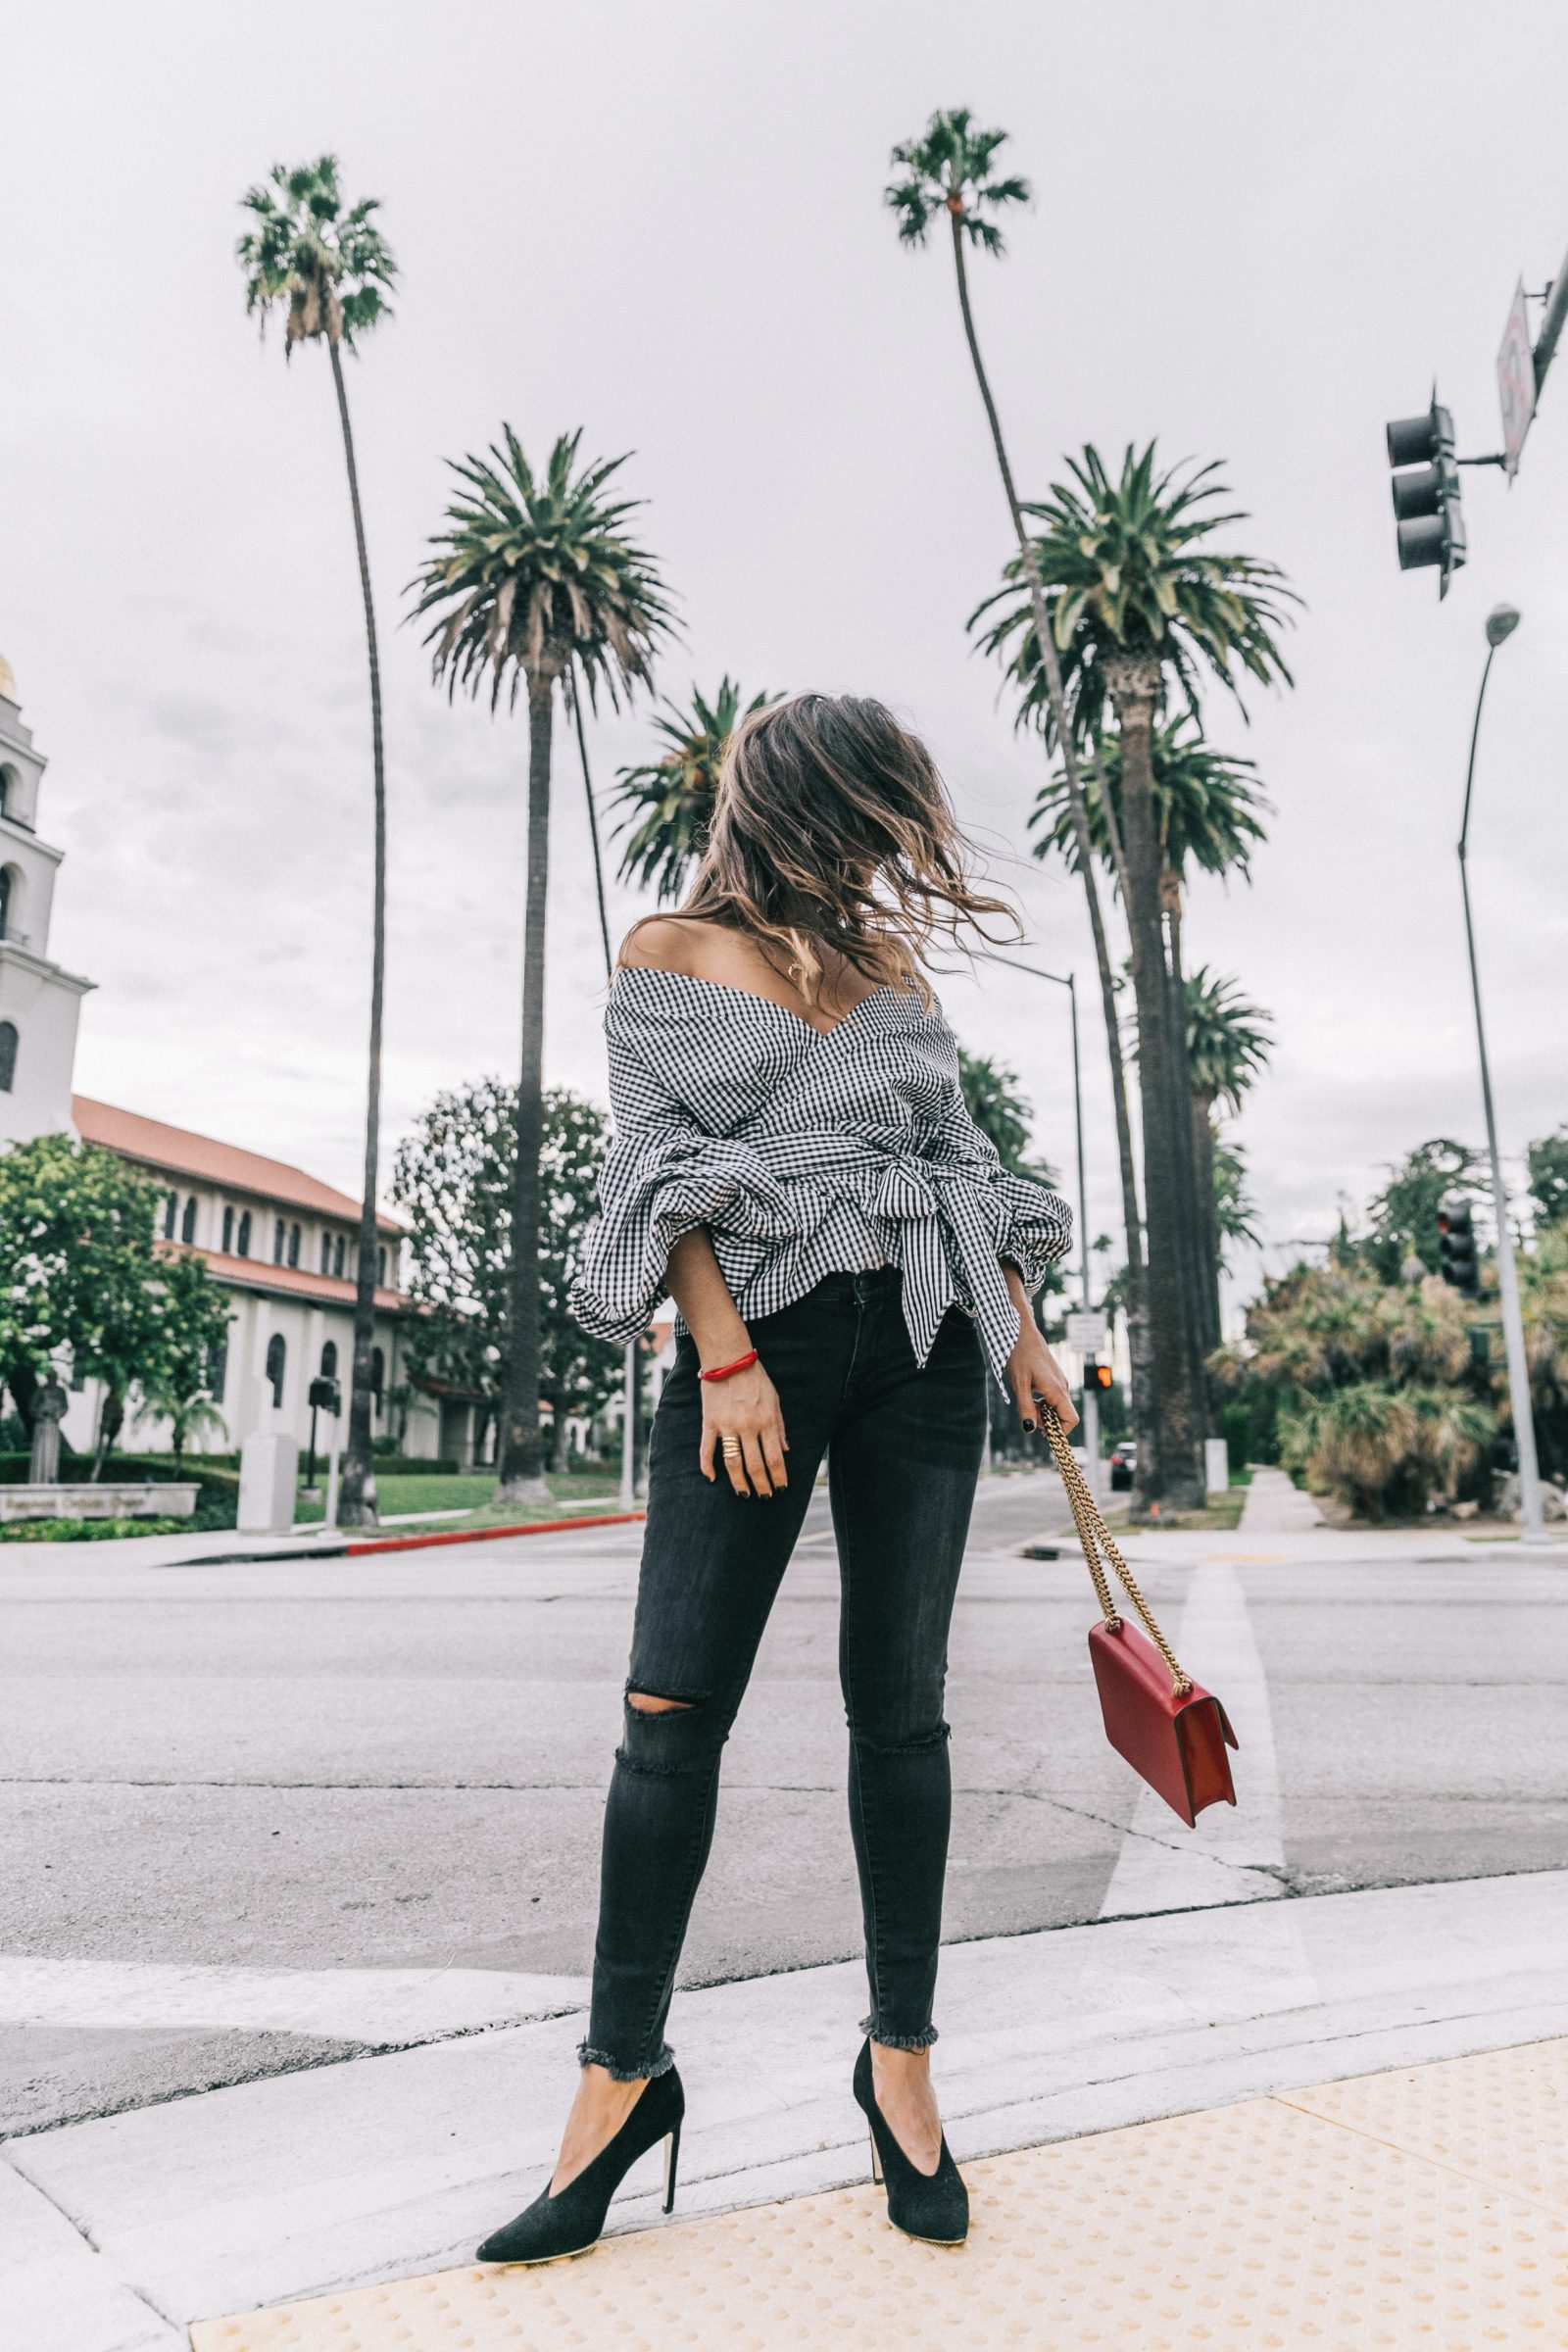 beverly_hills-off_the_shoulders_shirt-plaid-skinny_jeans-ripped_jeans-sincerely_jules_shop-gucci_bag-chicwish-outfit-street_style-los_angeles-collage_vintage-43